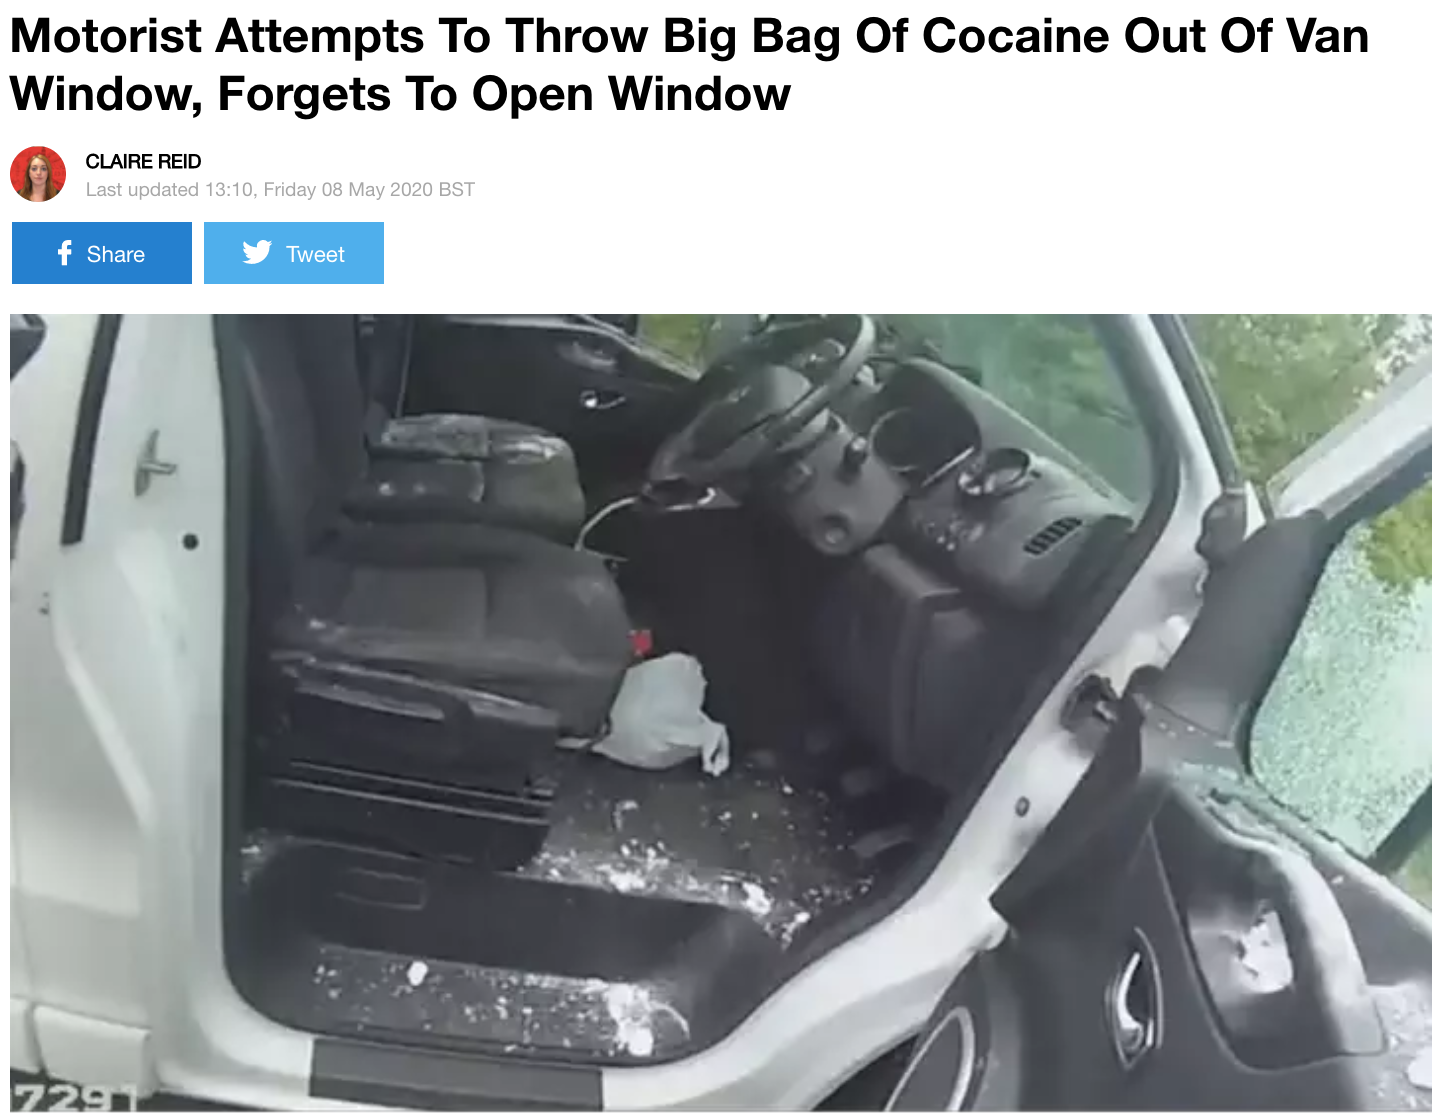 Motorist Attempts To Throw Big Bag Of Cocaine Out Of Van Window, Forgets To Open Window